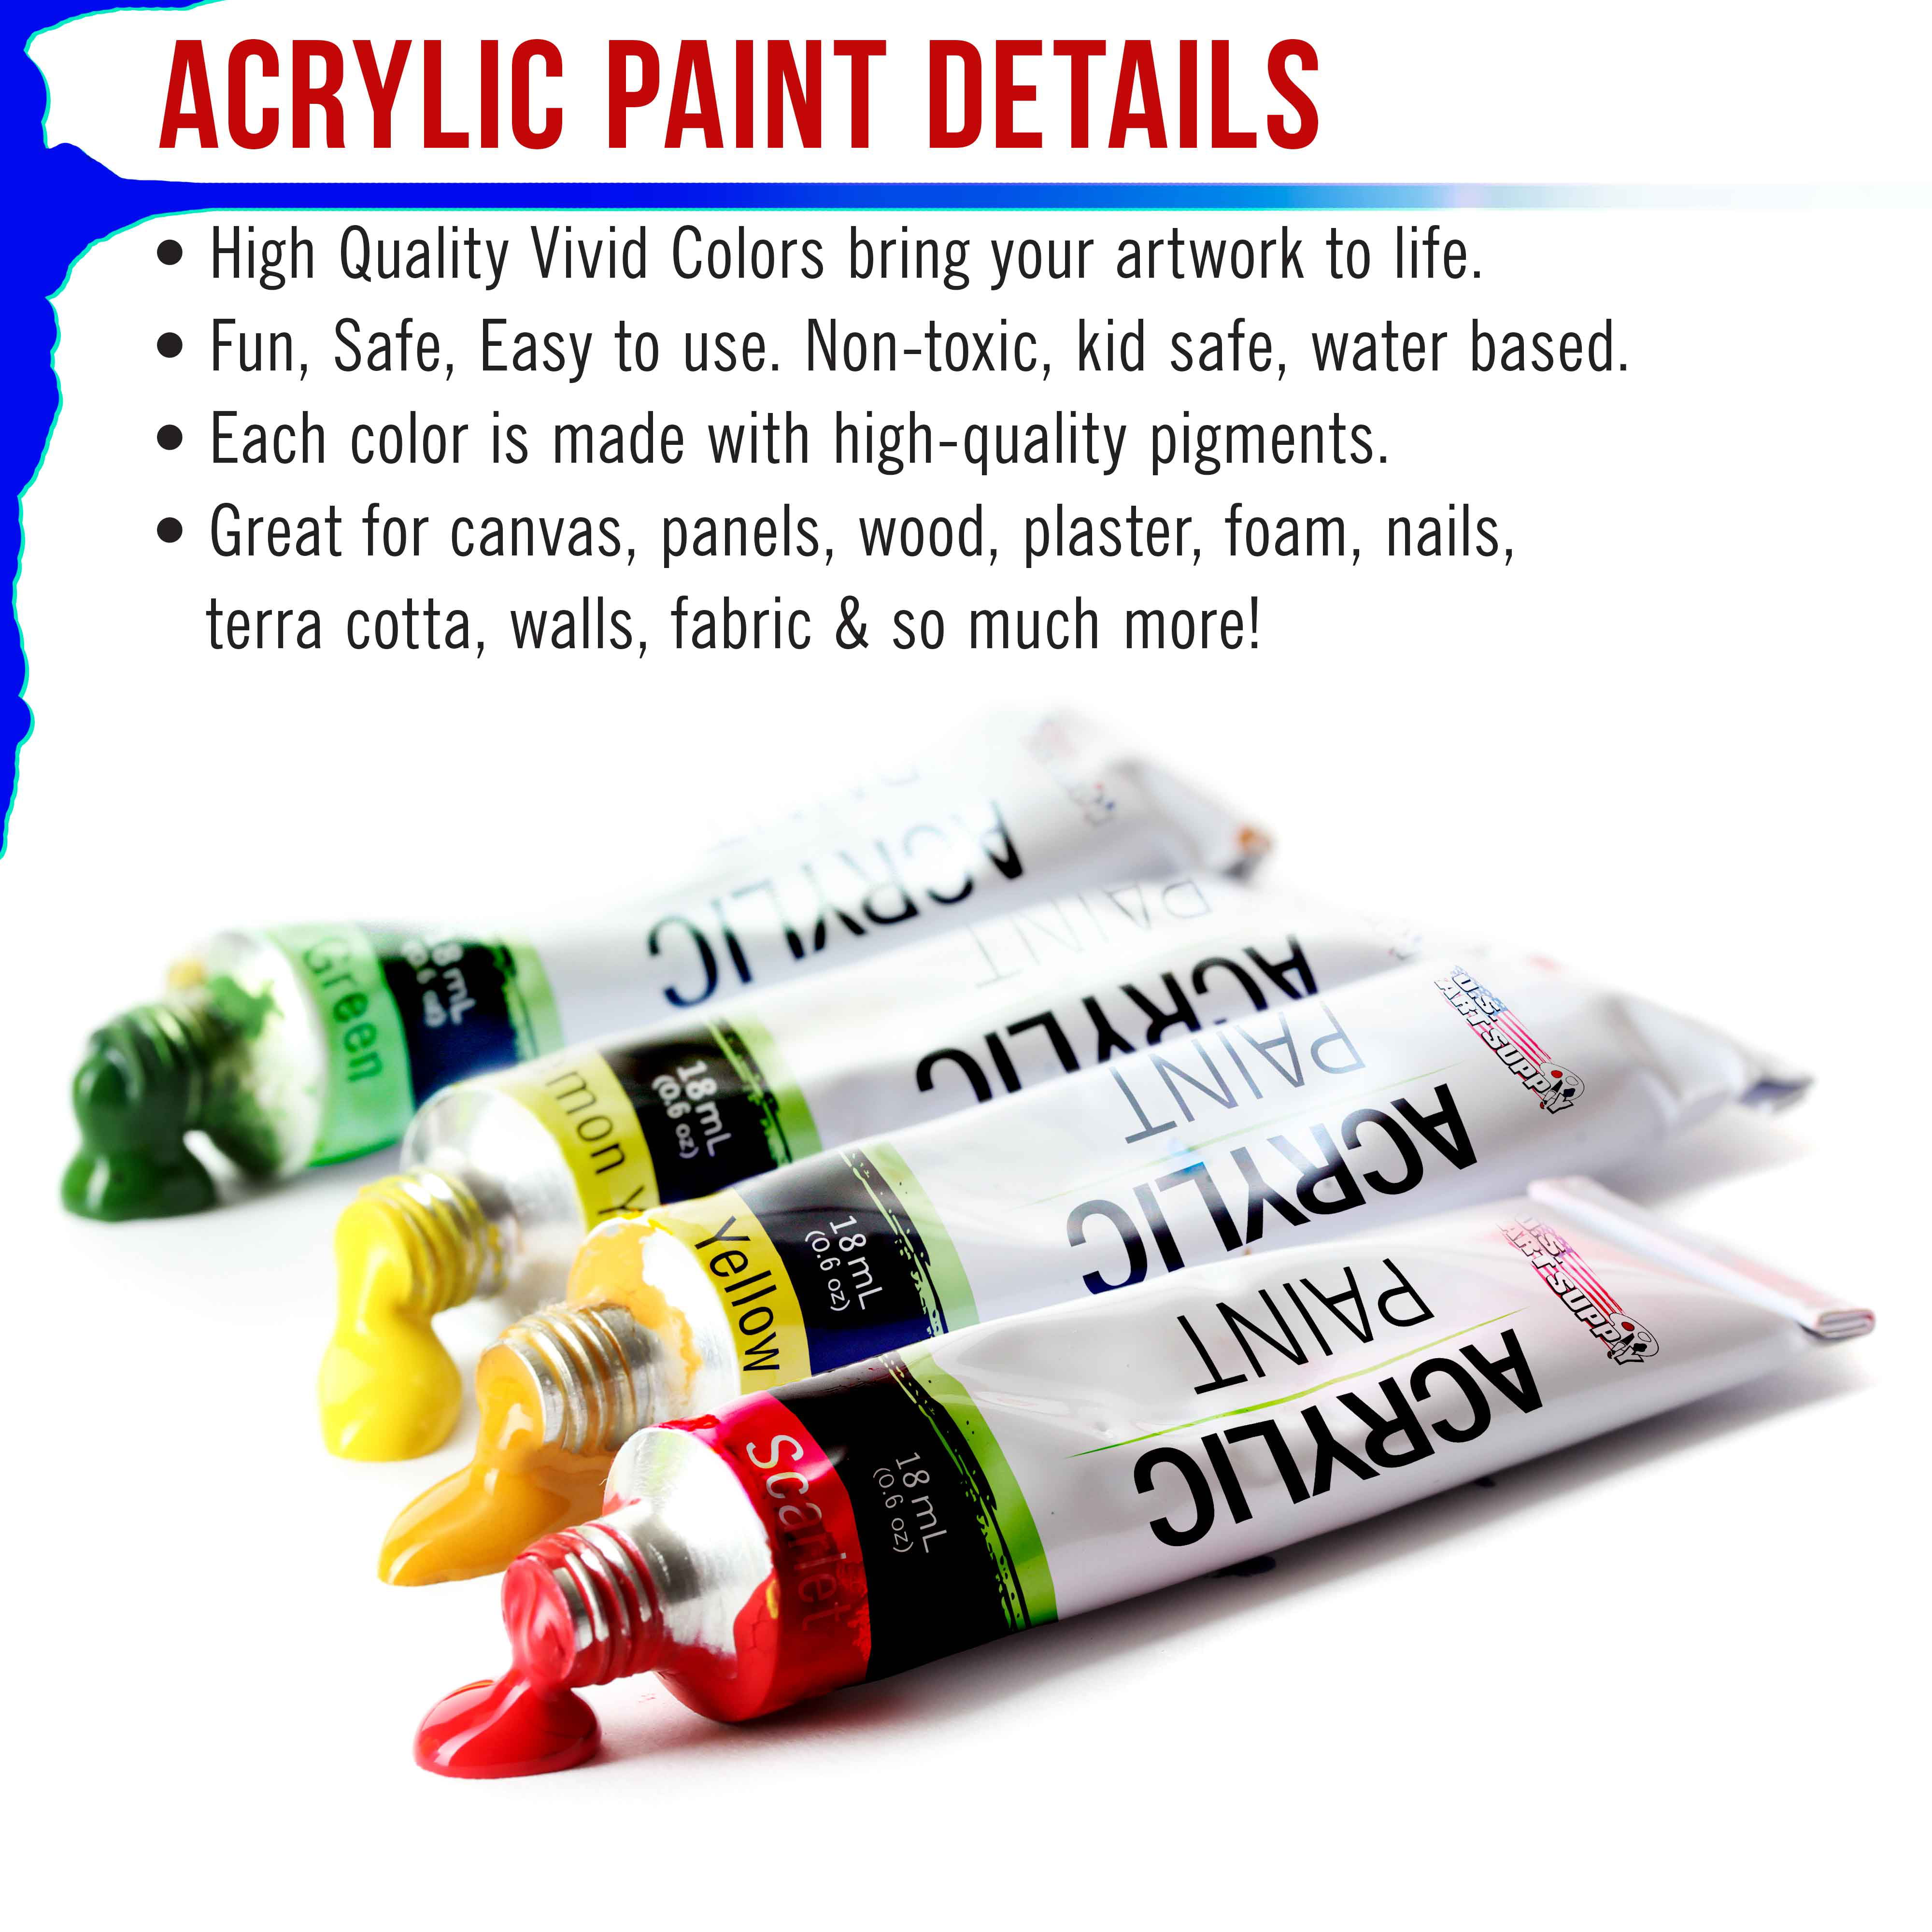 ABEIER Iridescent Acrylic Paint, Set of 18 Chameleon Colors, 2 oz/60ml  Bottles, Color-shifting, Non-Toxic, High Viscosity, Blendable, Paints on  Rocks Crafts Canvas Wood, Fabric, Ceramic & Stone : Arts, Crafts & Sewing 